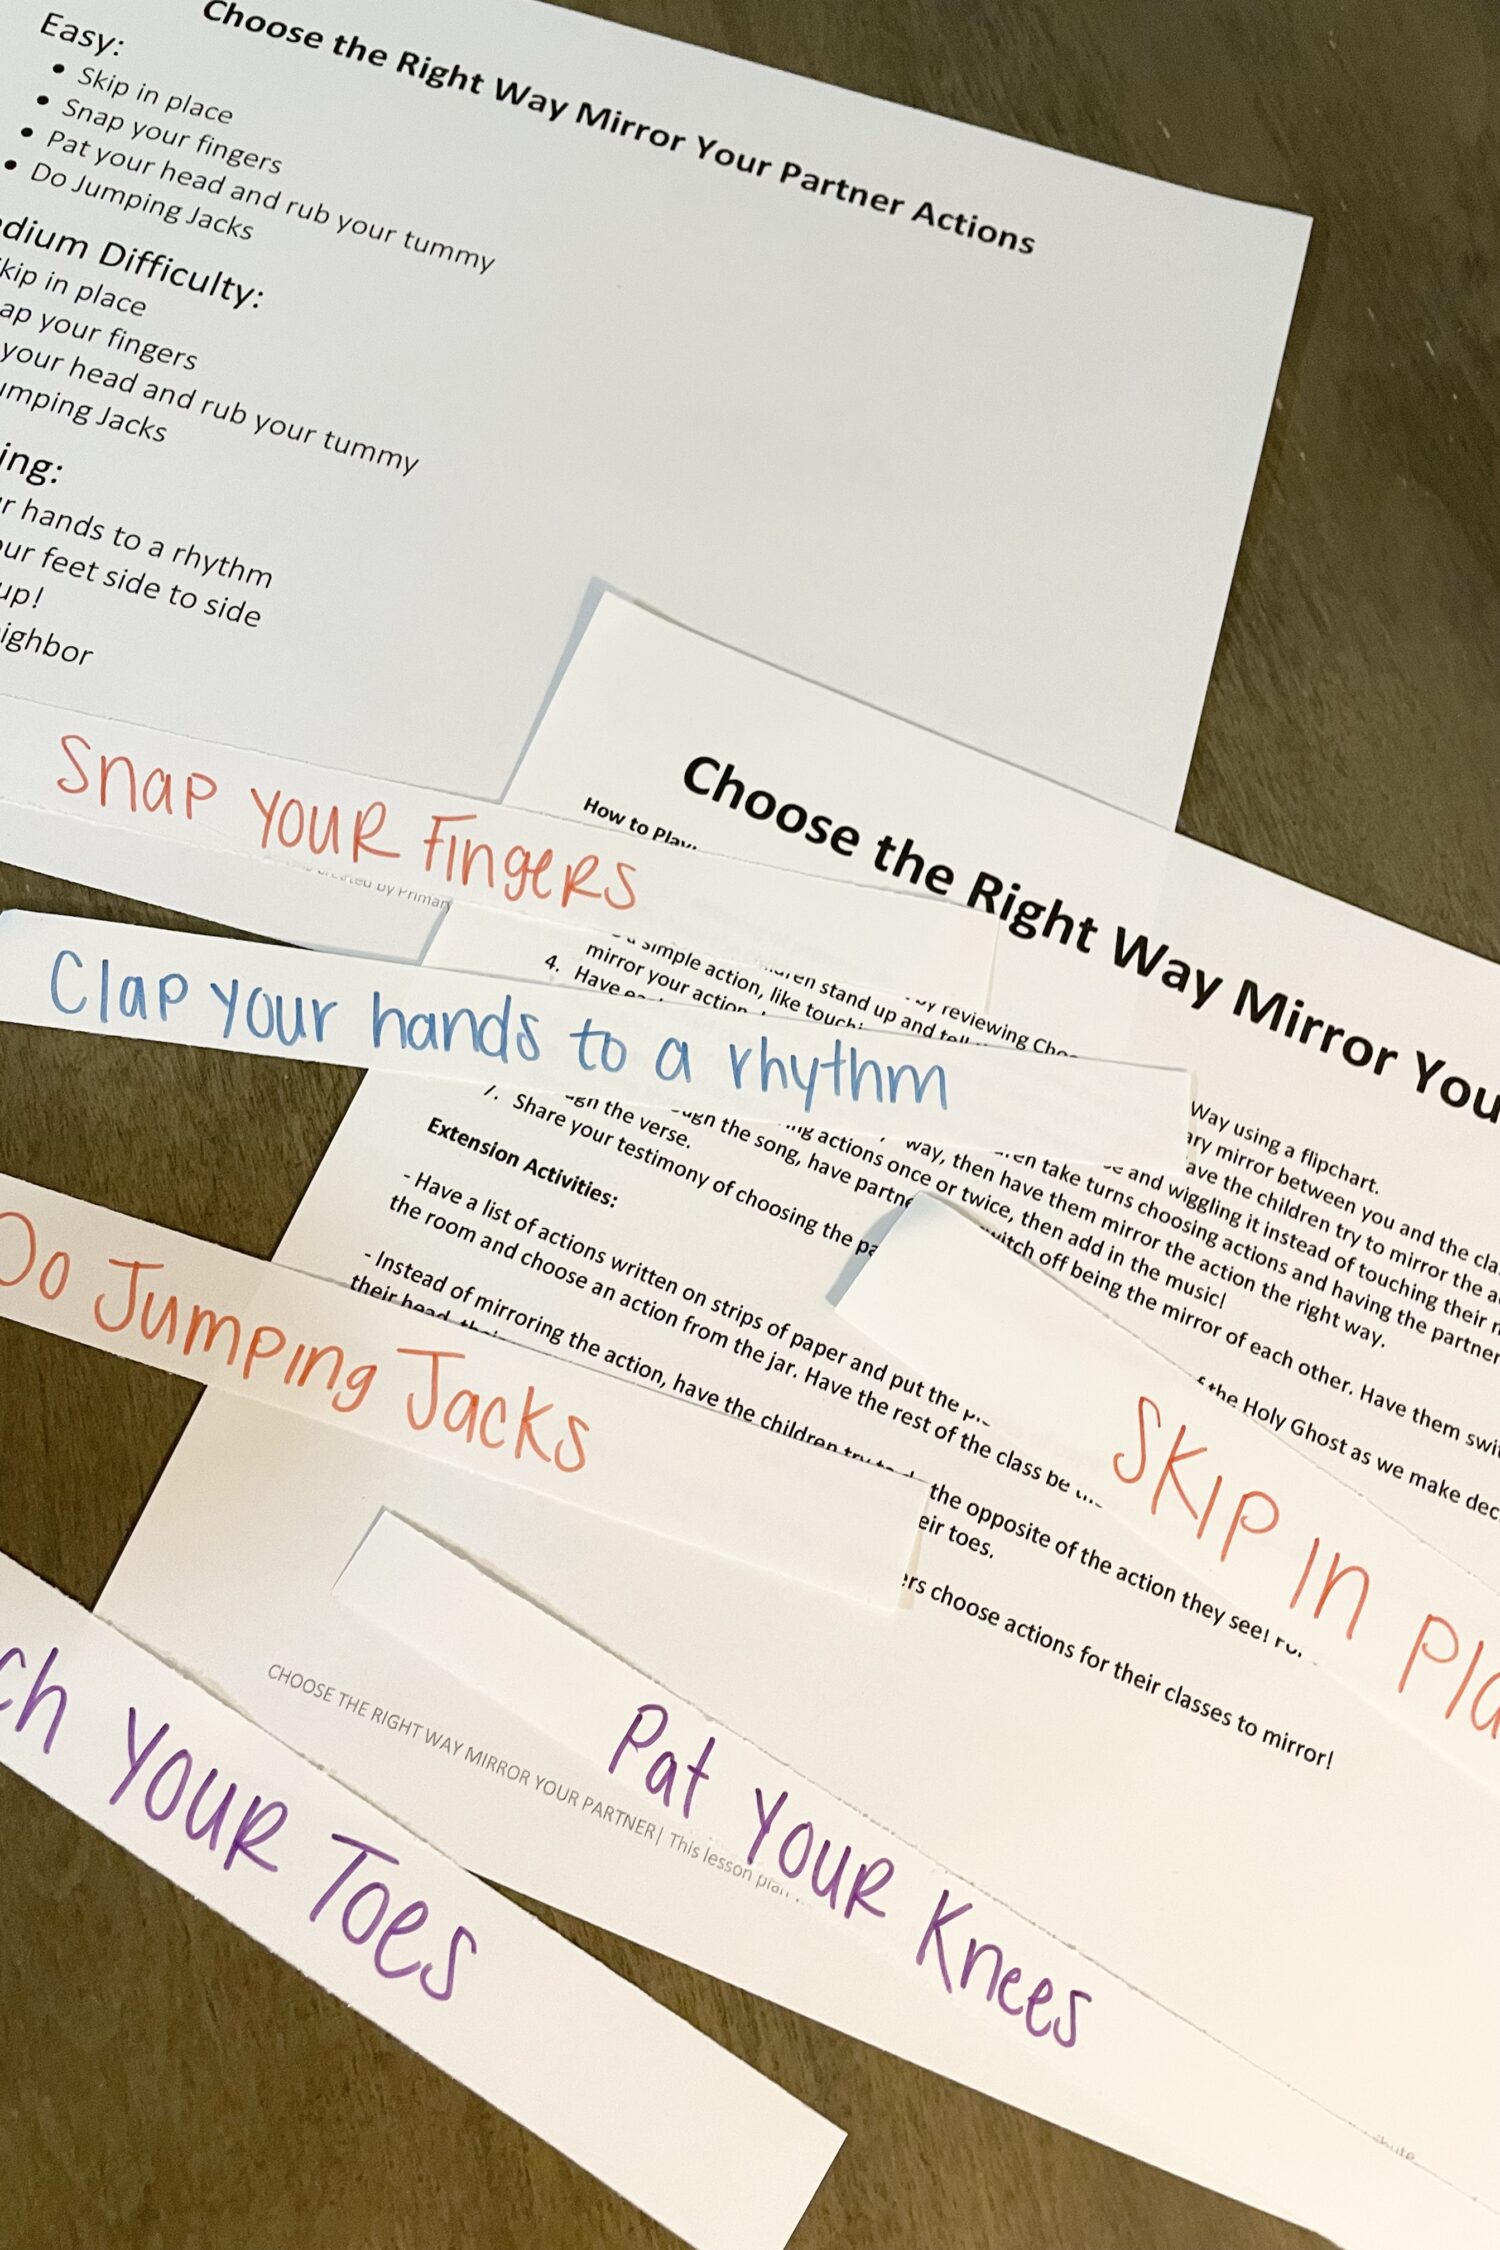 Choose the Right Way Mirror Your Partner singing time idea - A perfect way to tie in the lyrics with movement! Let the kids follow correctly and a "silly" way to contrast right and wrong. Song helps for LDS Primary music leaders.